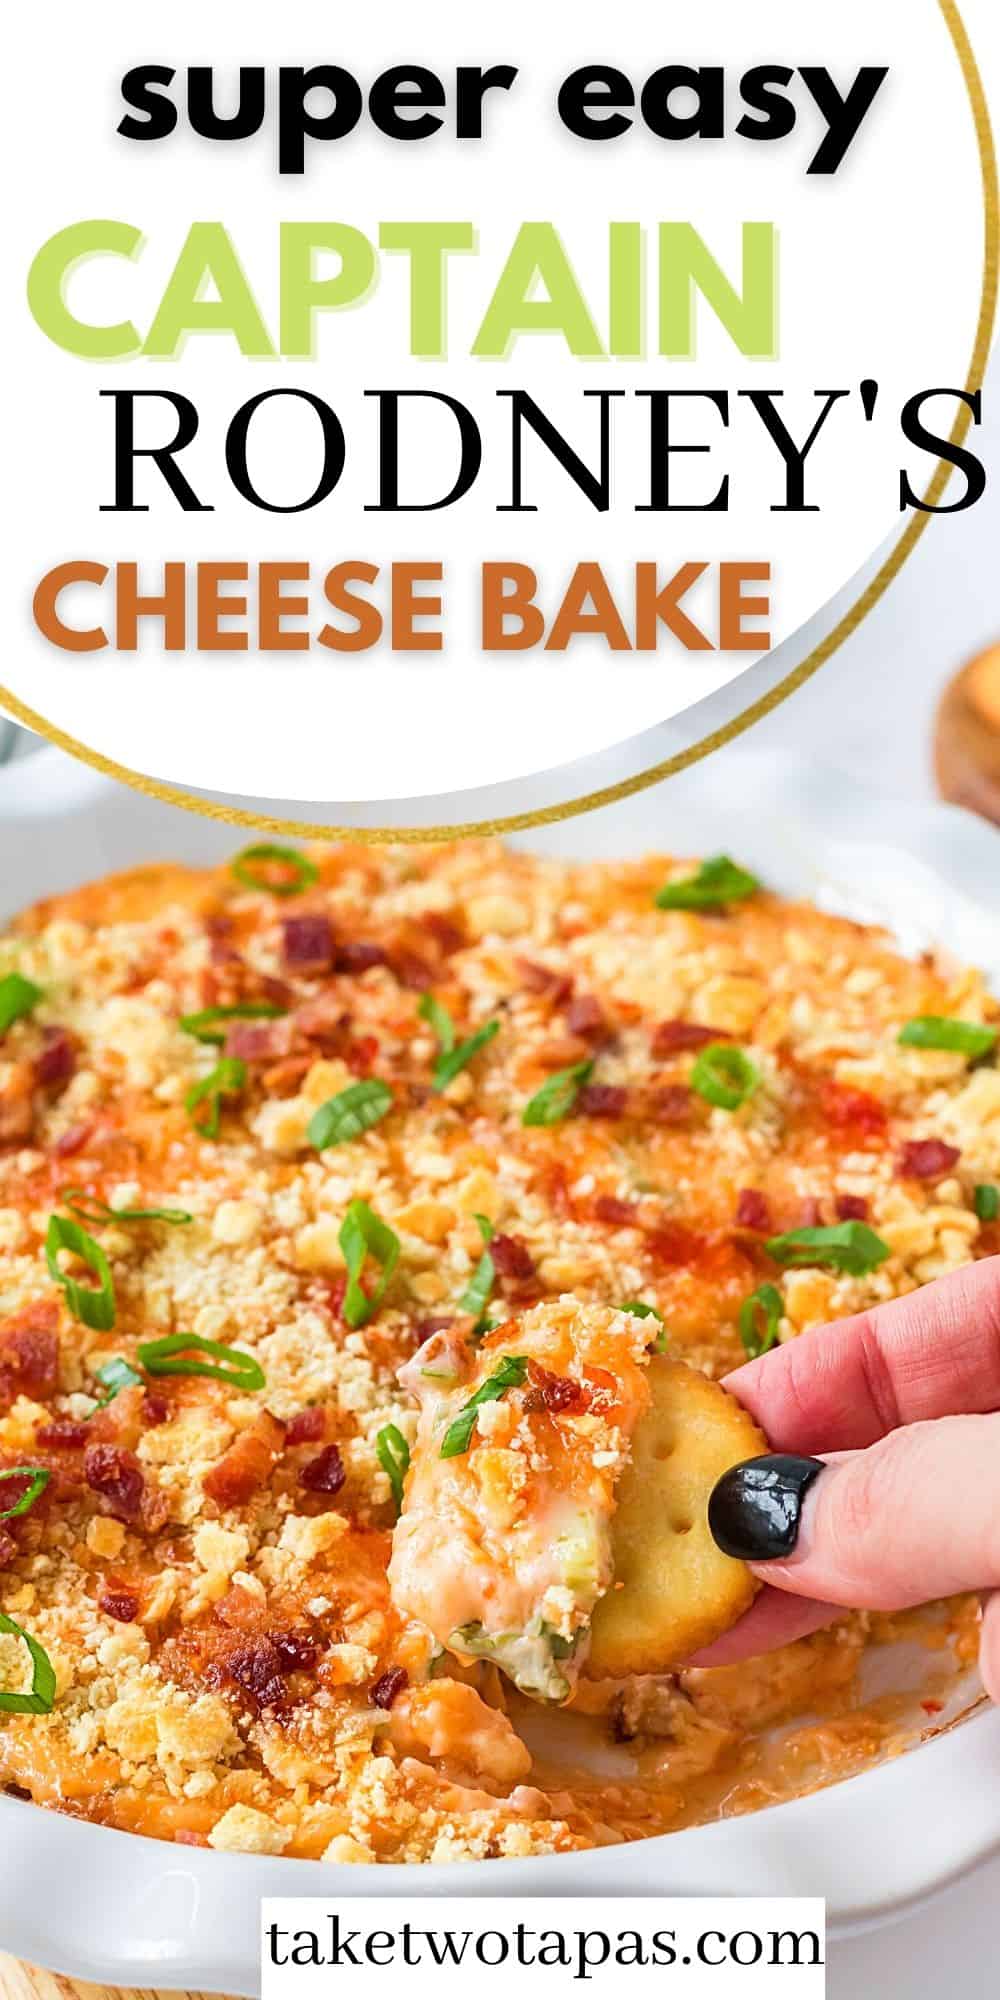 dip with text "super easy captain rodney's cheese bake"